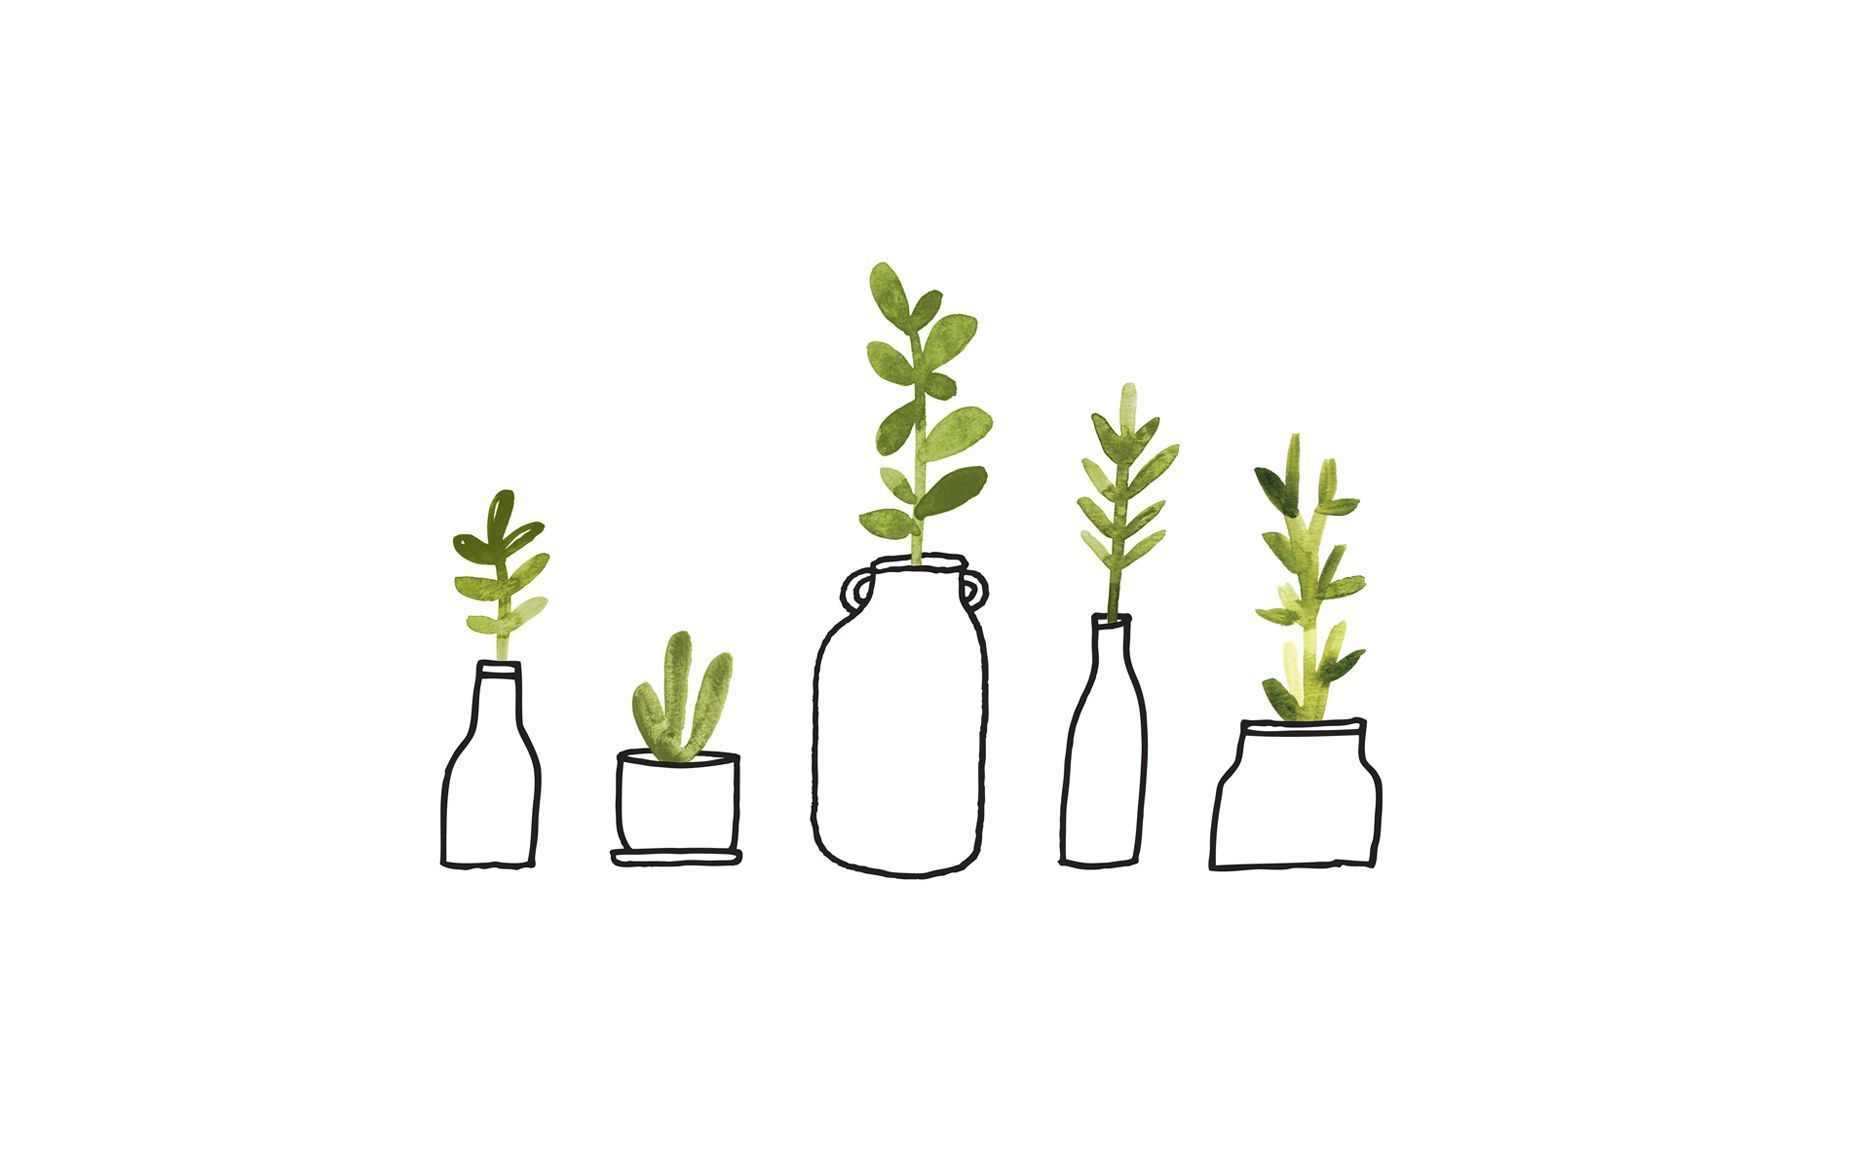 A drawing of several glass vases with plants in them - Minimalist